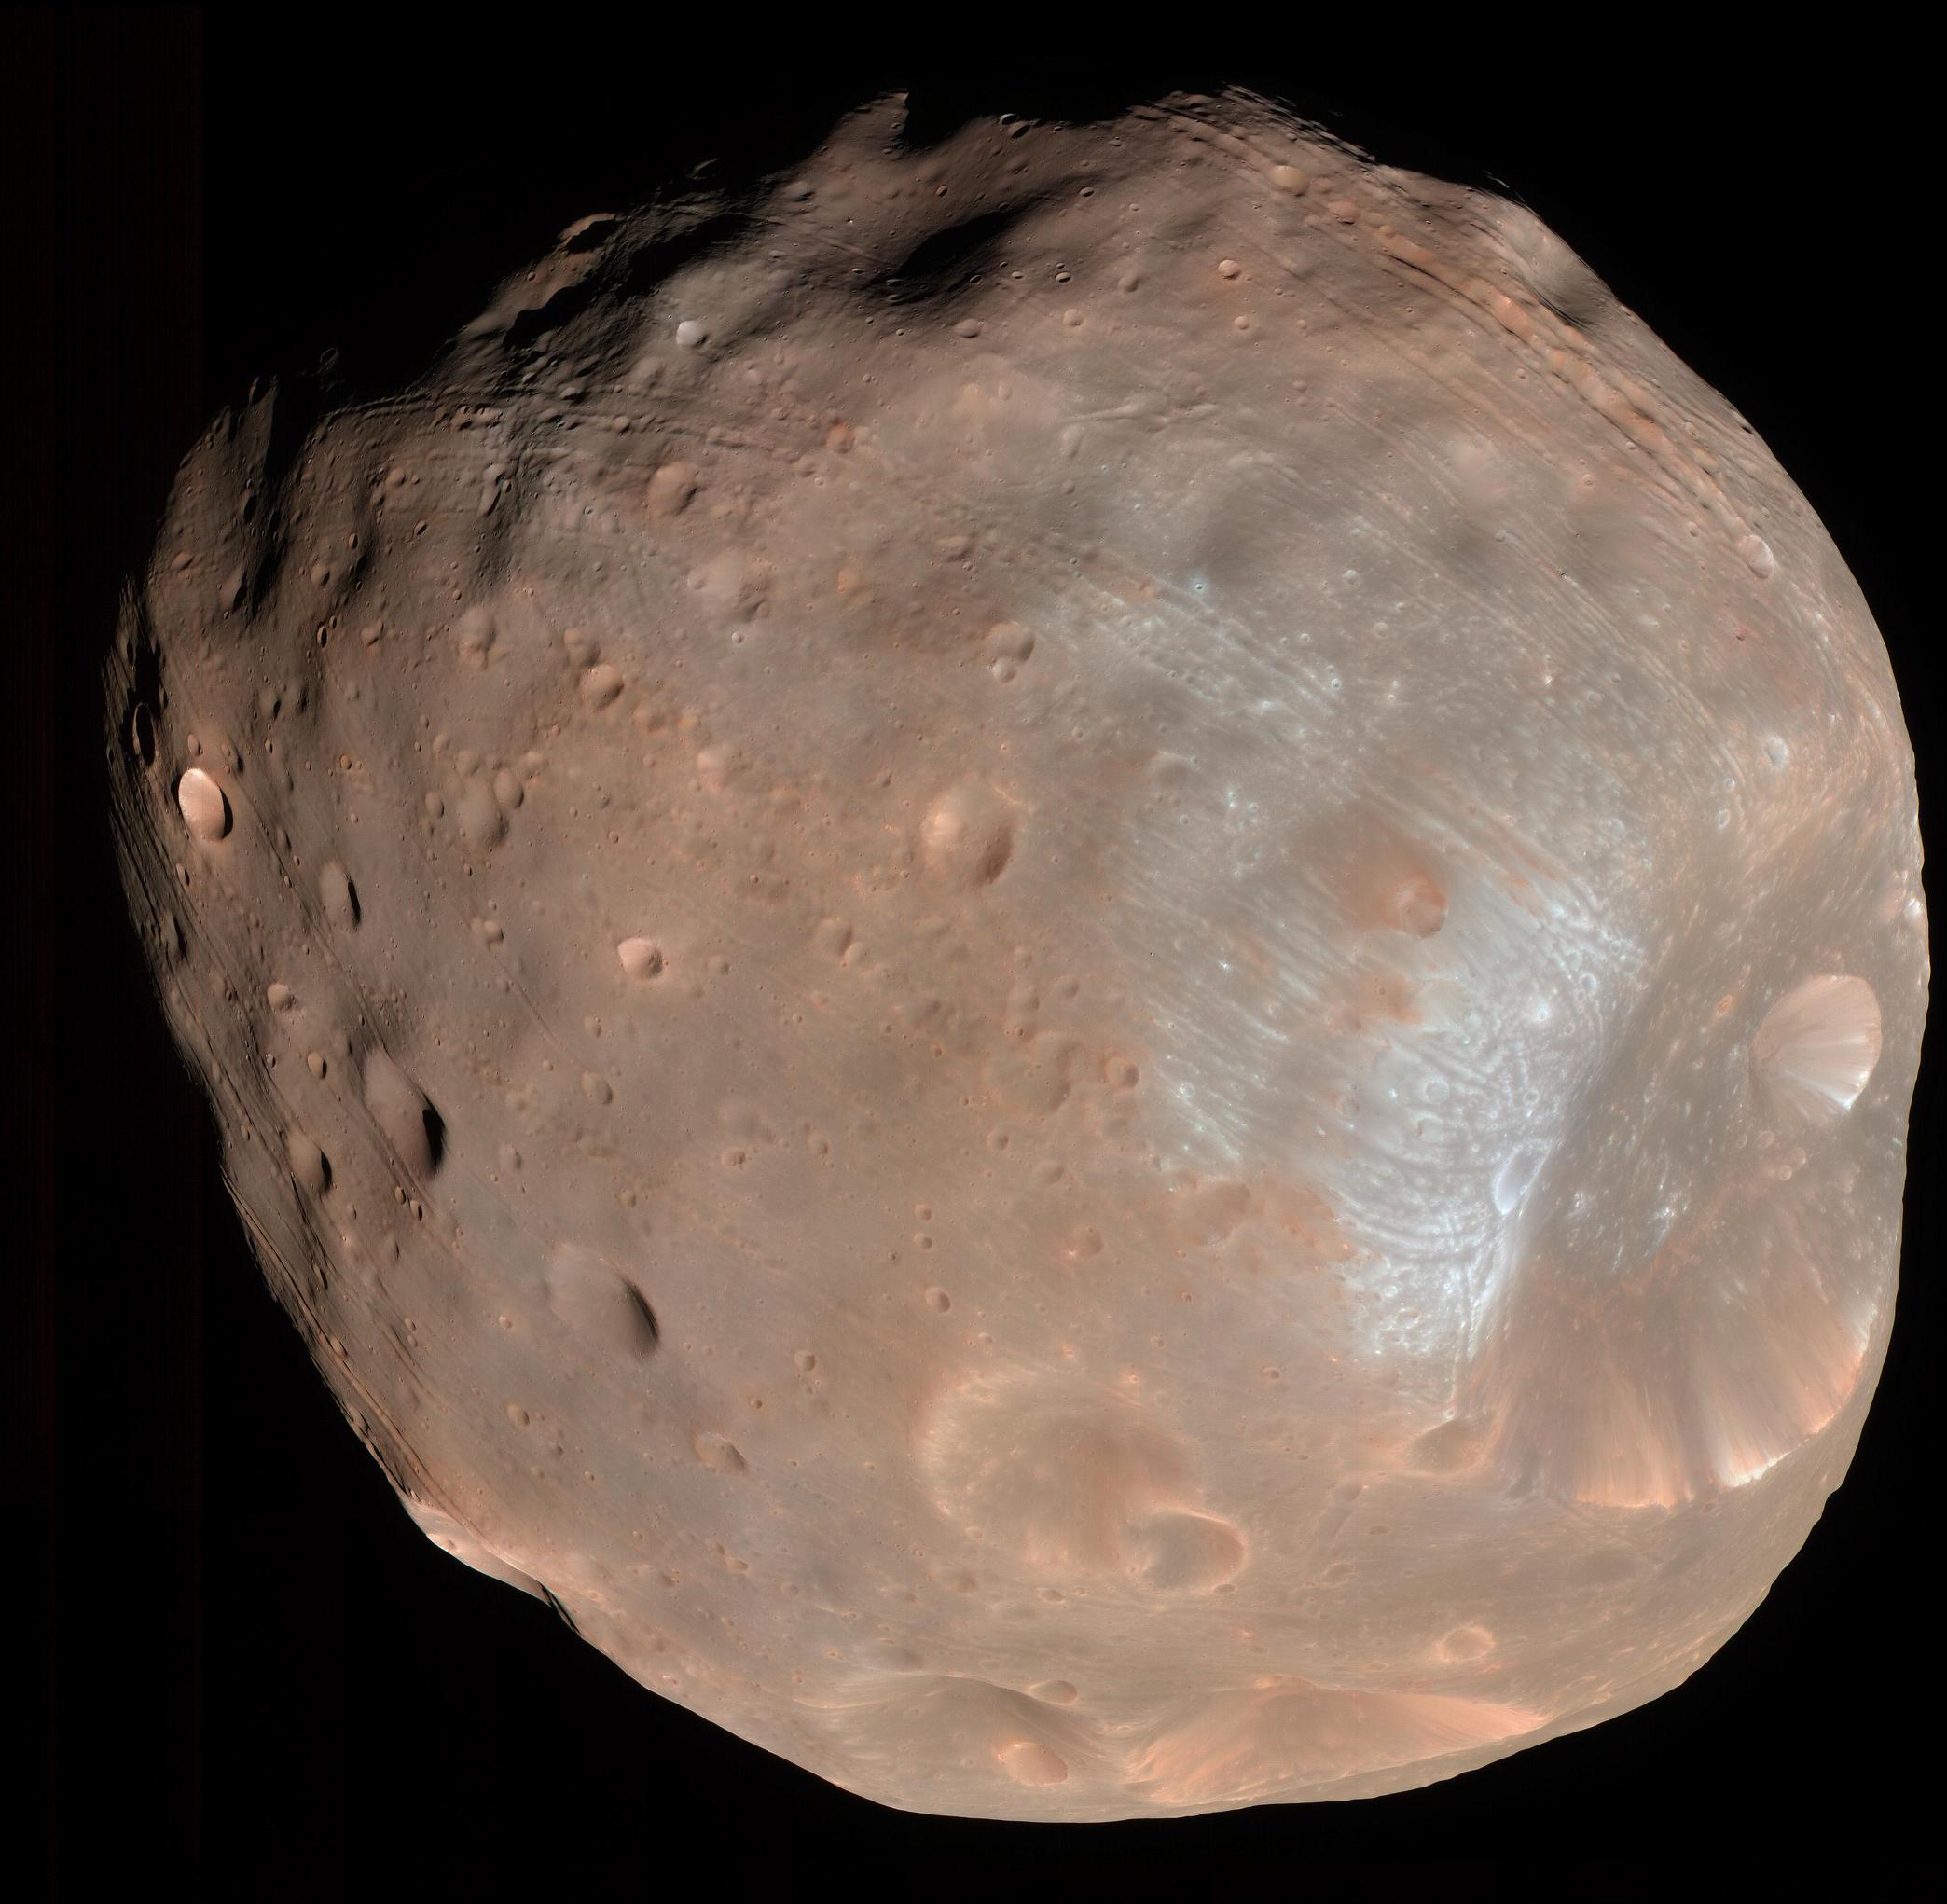 The High Resolution Imaging Science Experiment (HiRISE) camera on NASA's Mars Reconnaissance Orbiter took two images of the larger of Mars' two moons, Phobos, within 10 minutes of each other on March 23, 2008.